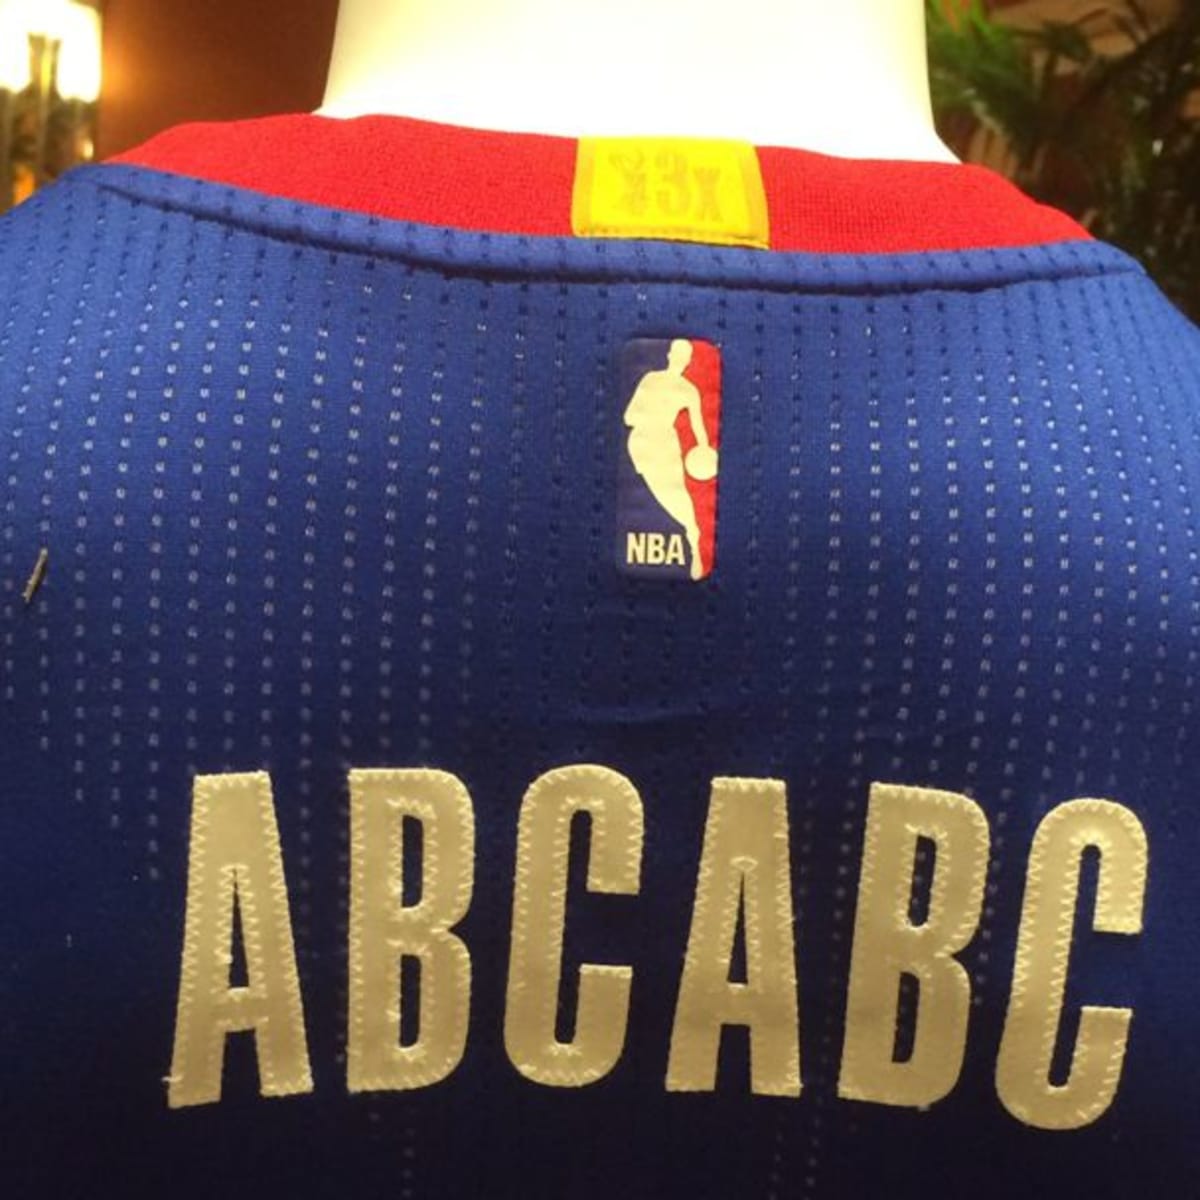 Can patches be removed without damaging the jersey? : r/basketballjerseys